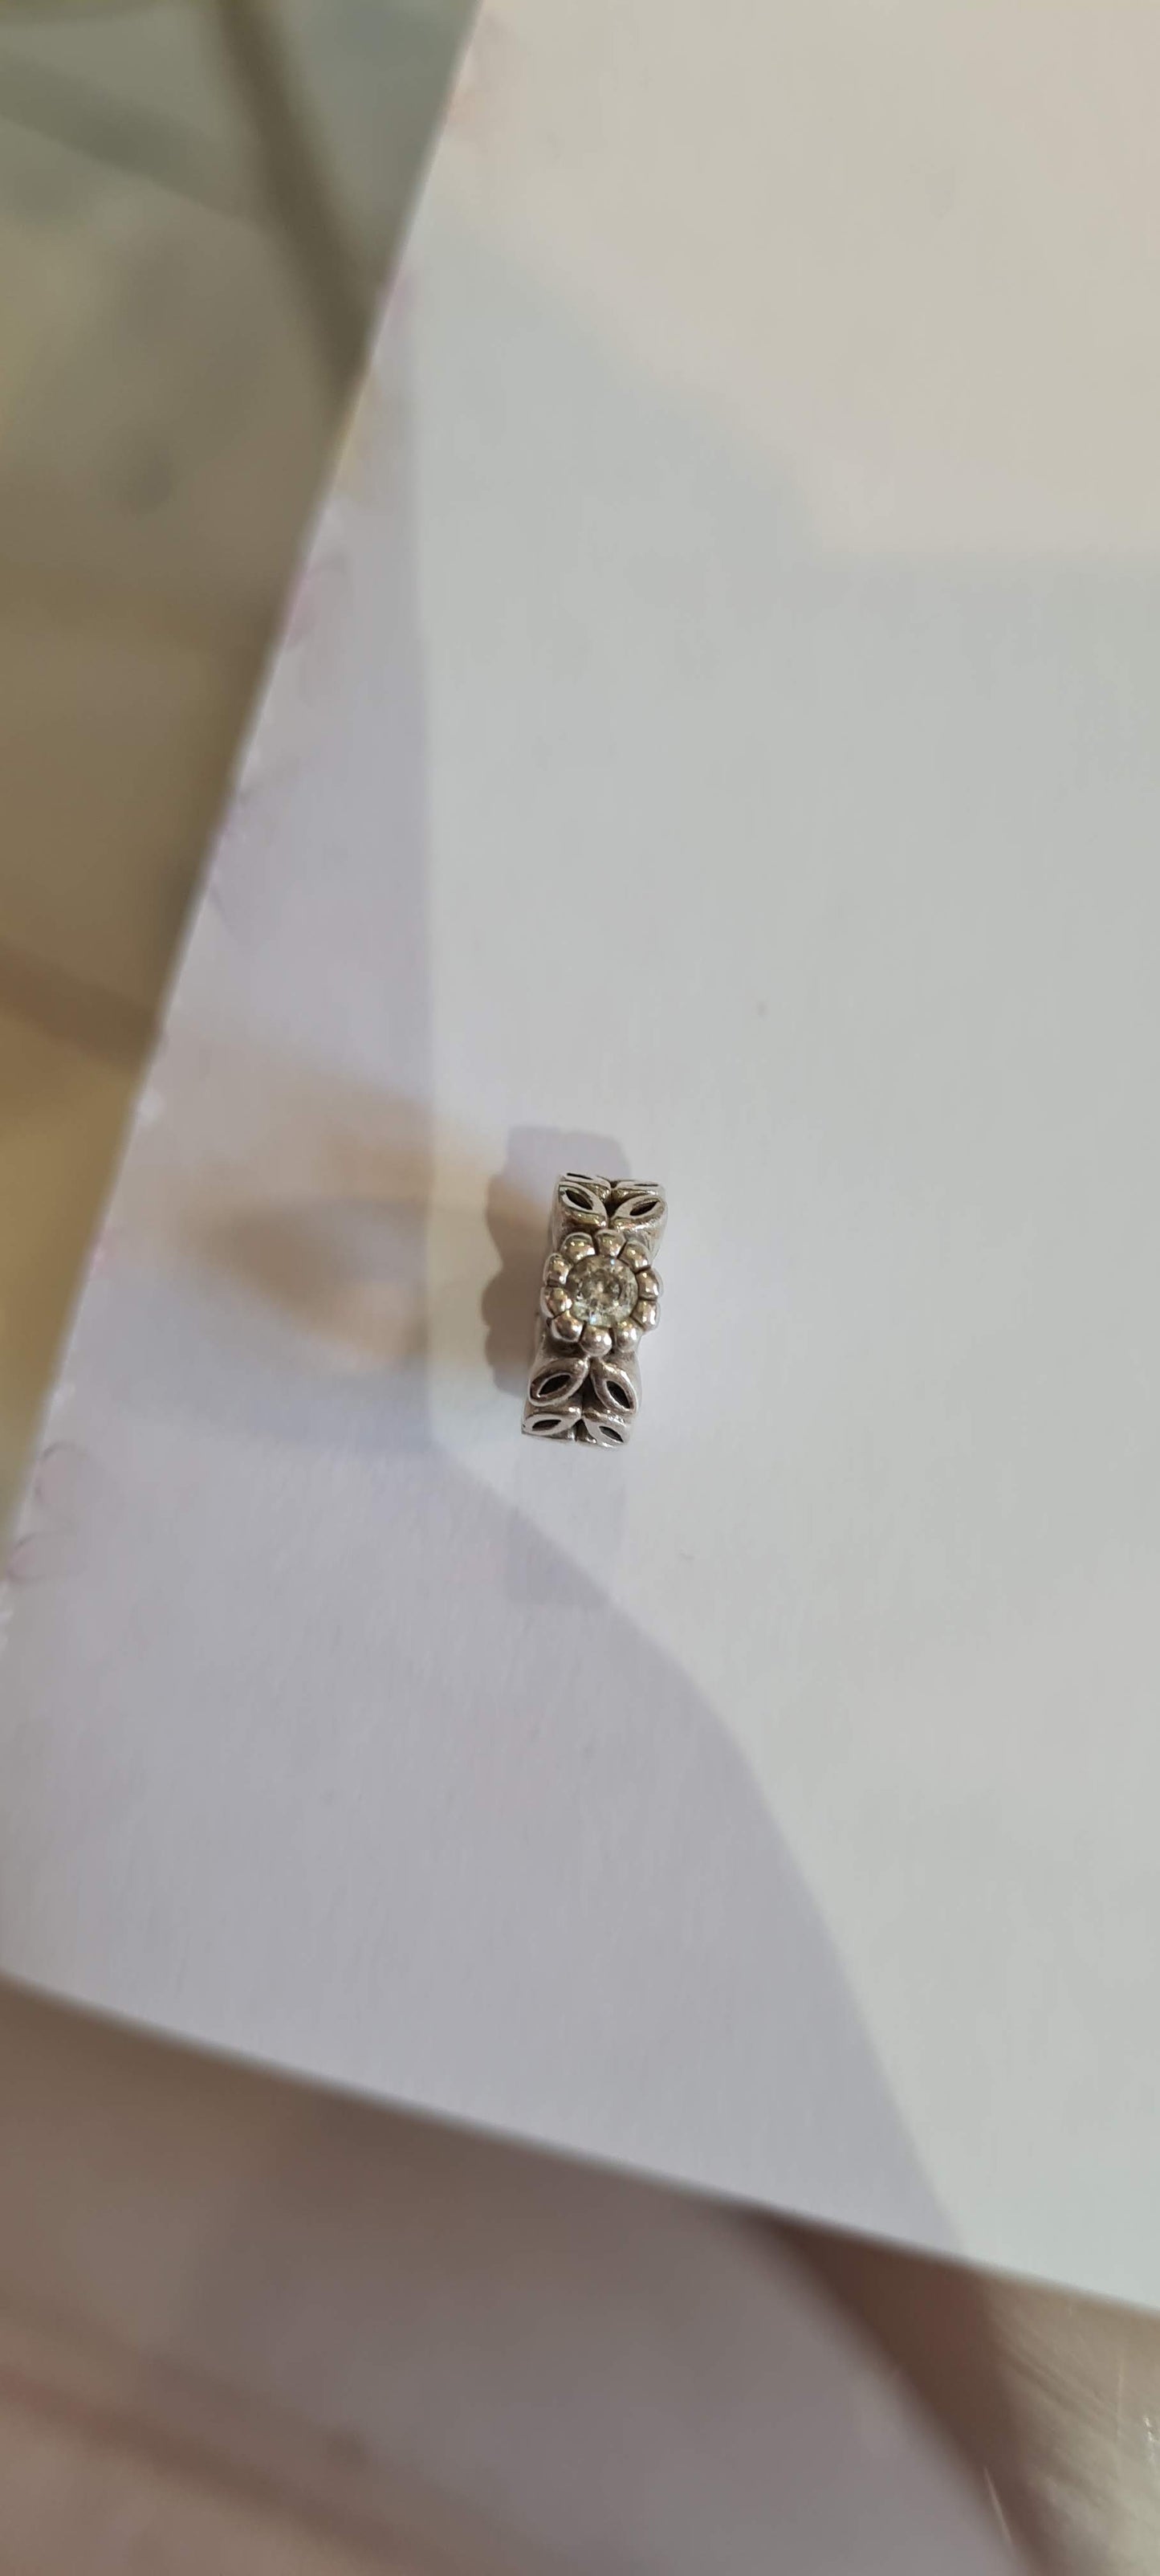 Genuine Pandora Spacer Flower Clear Stone Sold As a Pair